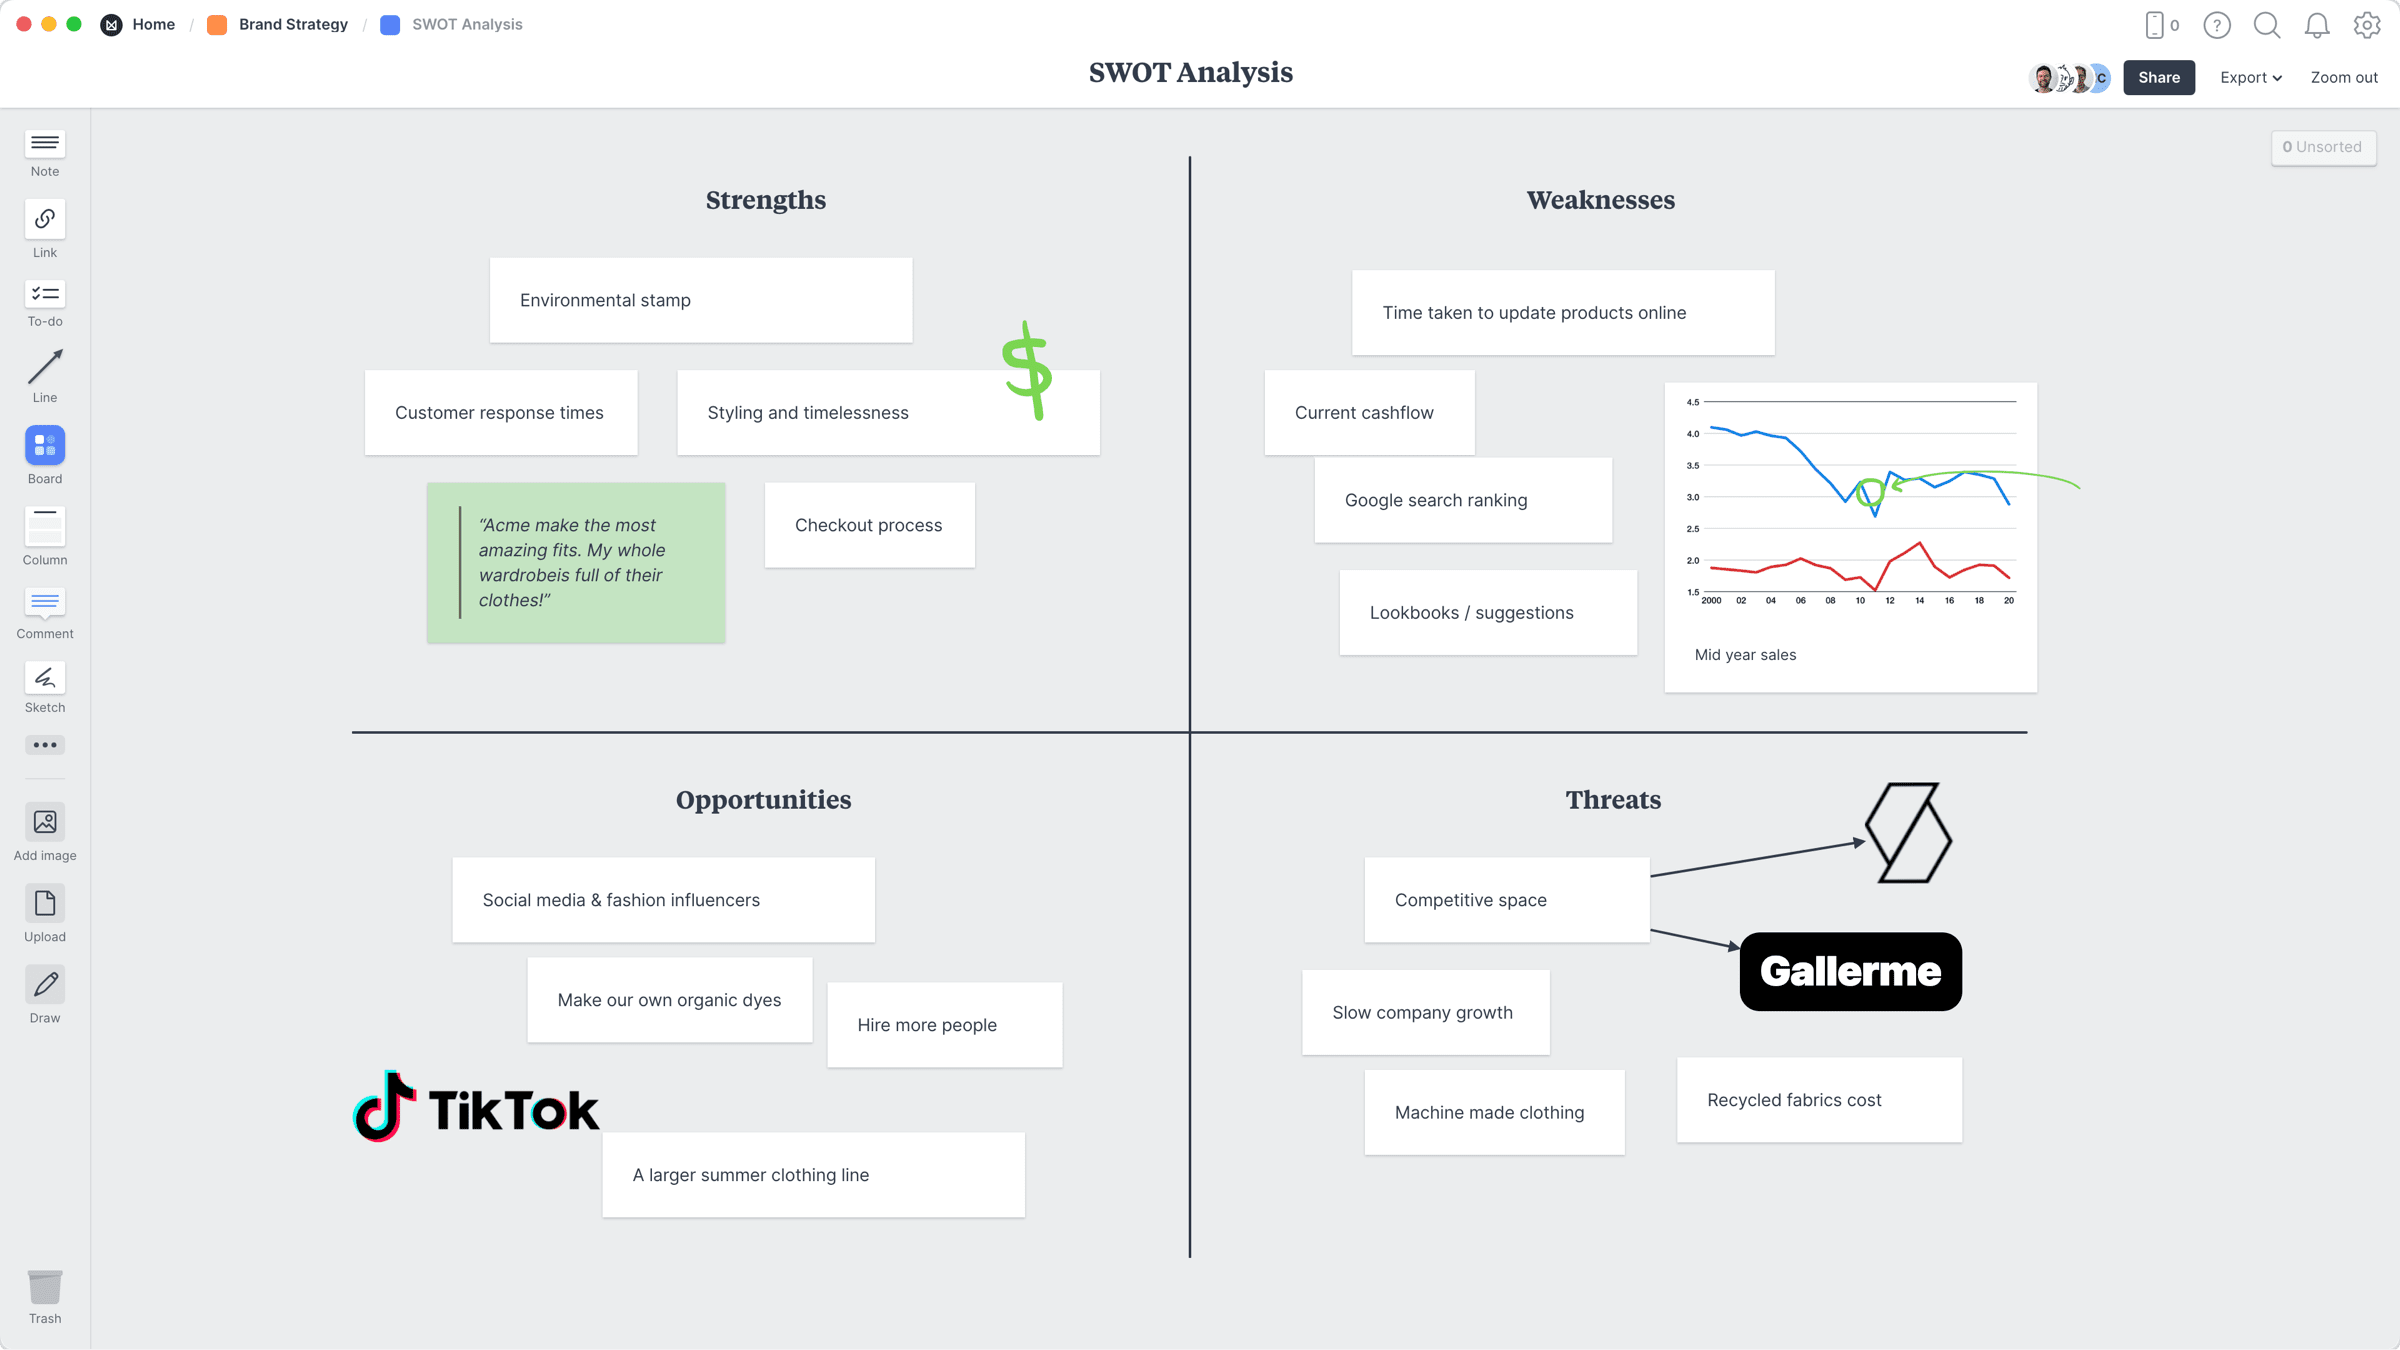 Brand SWOT Analysis Template, within the Milanote app